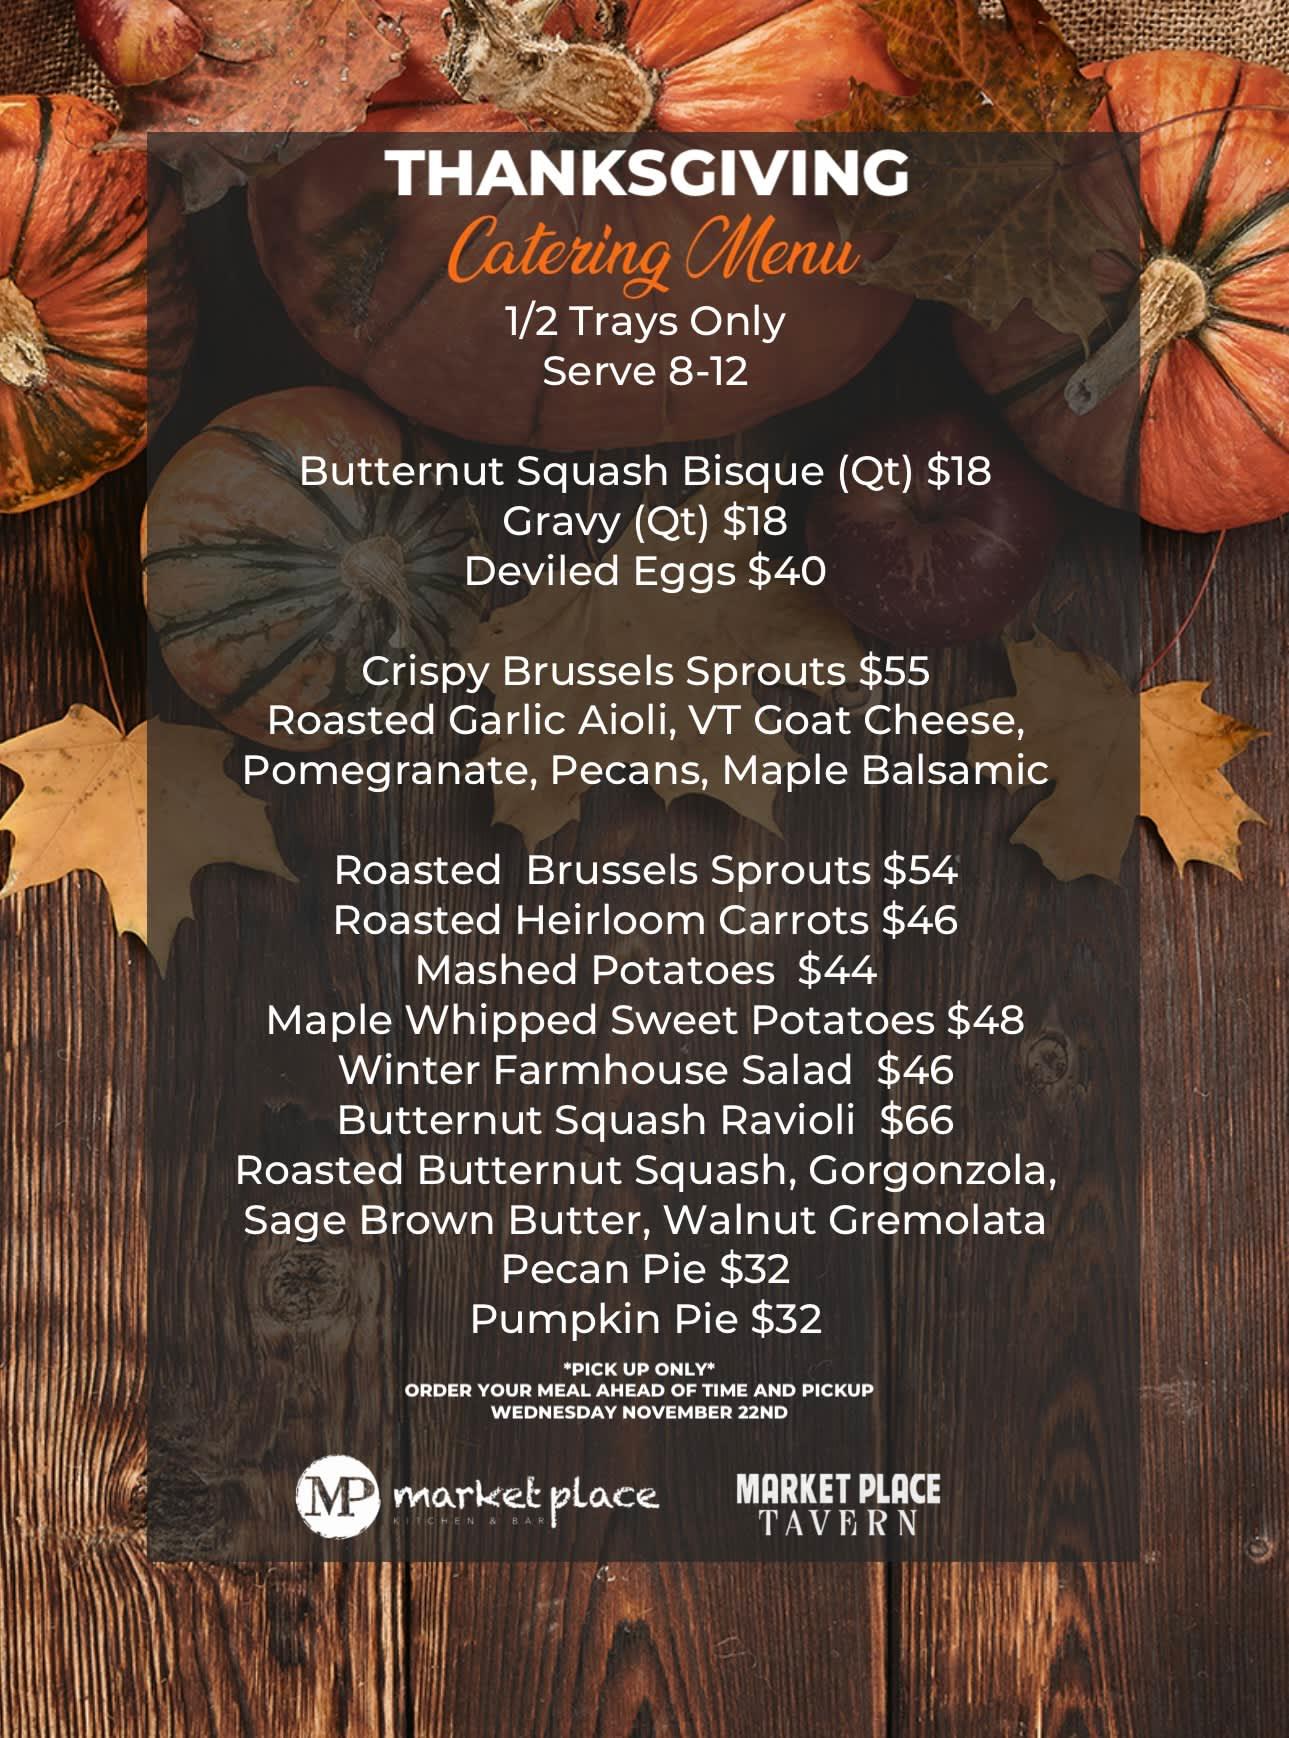 🥧🦃 THANKSGIVING CATERING MENU! 🦃🥧

‼️ 1/2 Trays Available That Serve 8-12 People‼️

Get Your Orders In!! 
Pick Up Wednesday Thanksgiving Eve!

CLOSED THANKSGIVING DAY